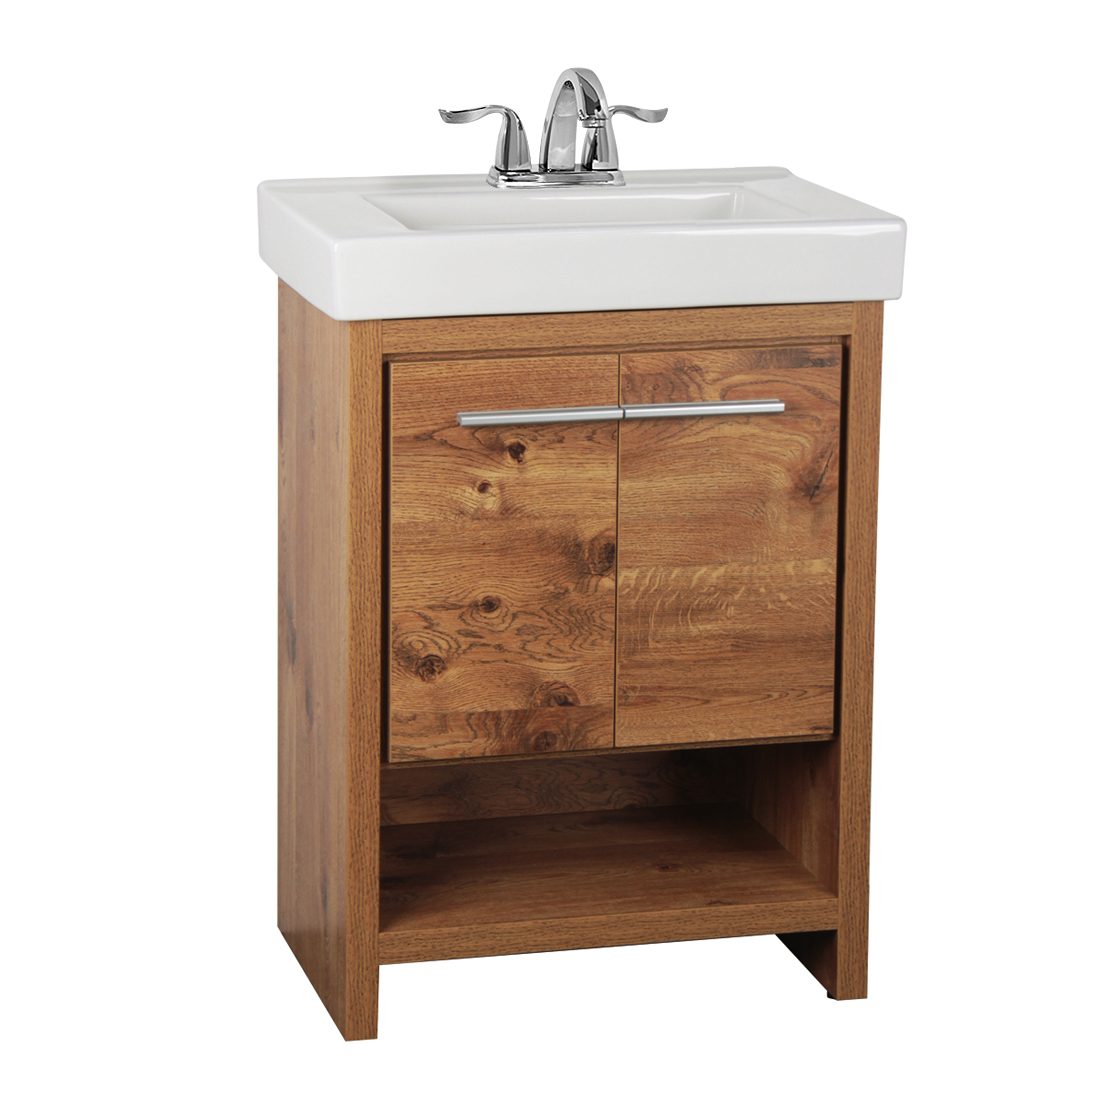 Verona Collection 24 Vanity Dolphin, 24 Oak Vanity With Drawers